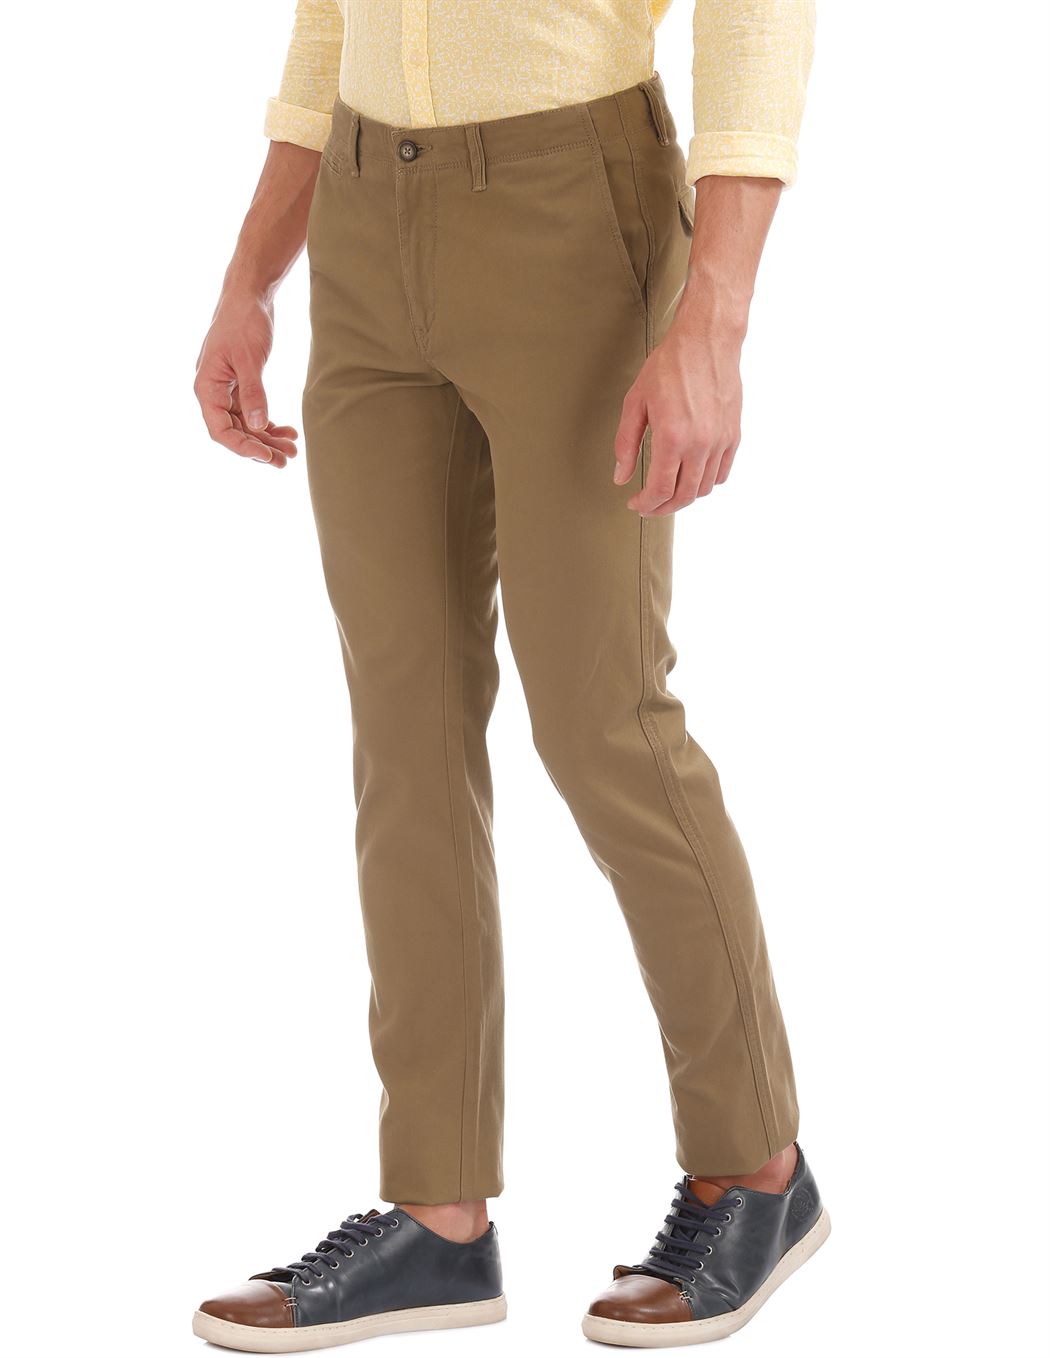 Buy Cotton Chino Pants Bundle Of 2 For Women Online In India